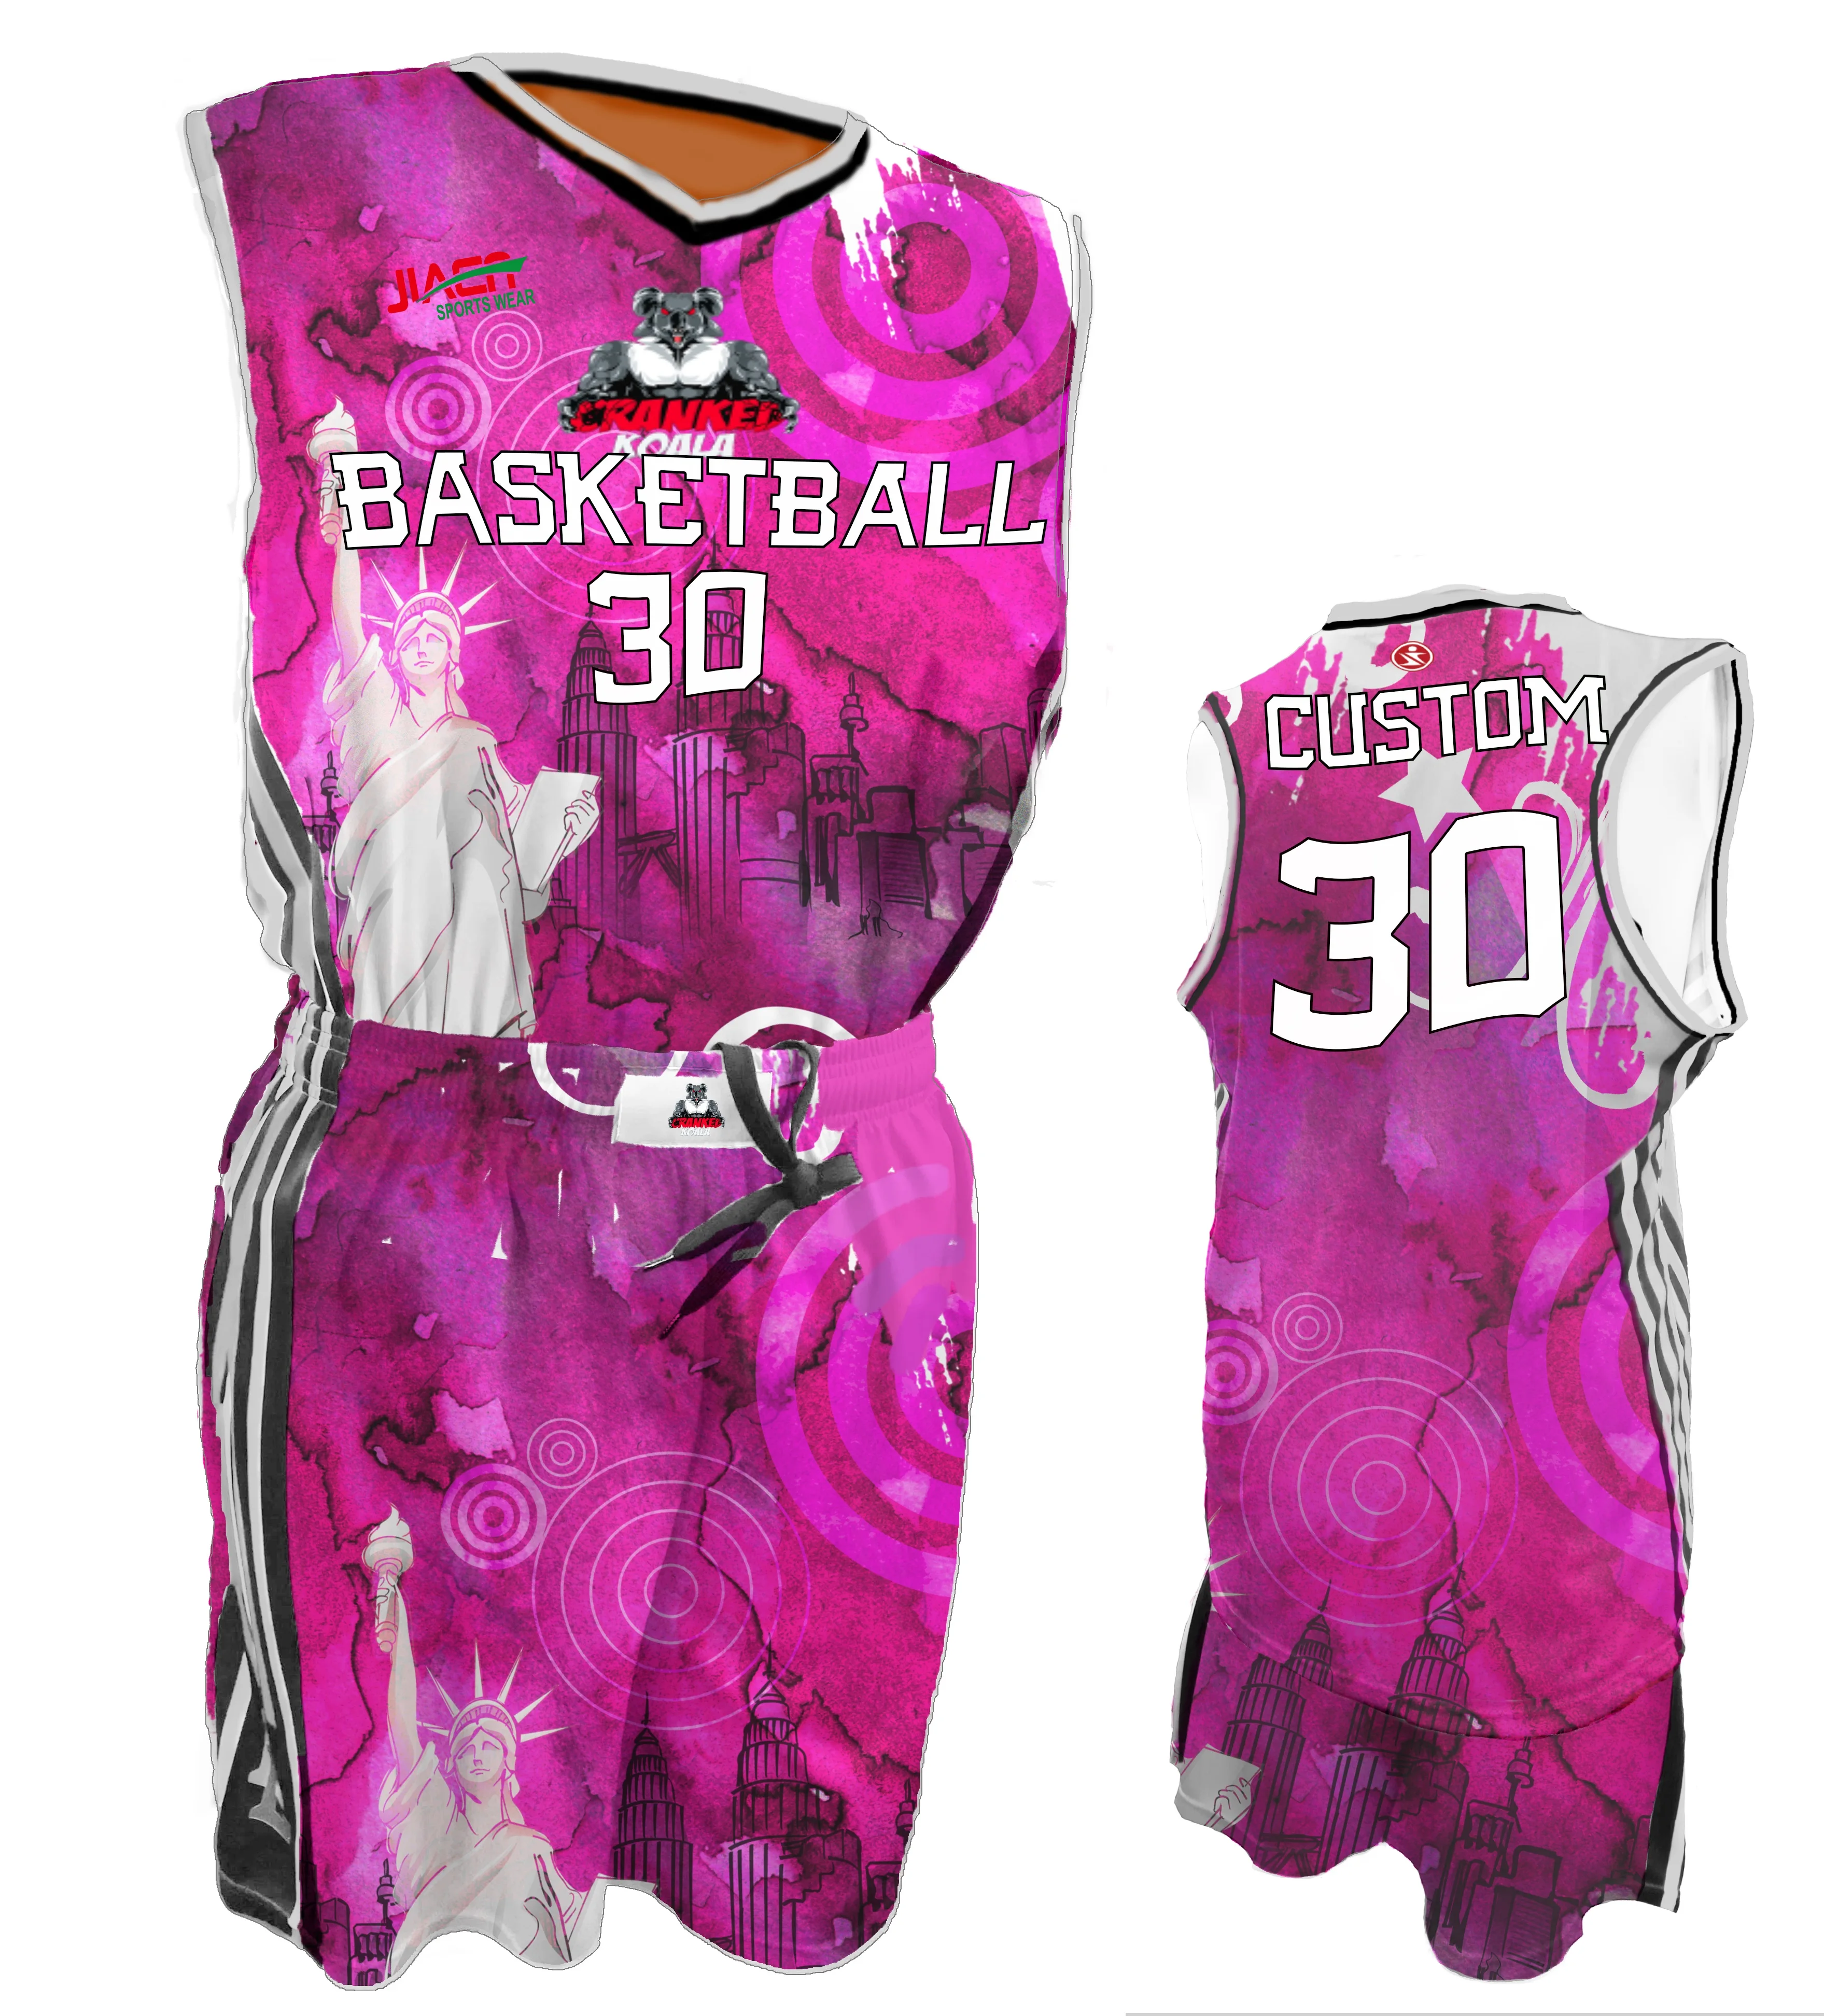 white and pink jersey